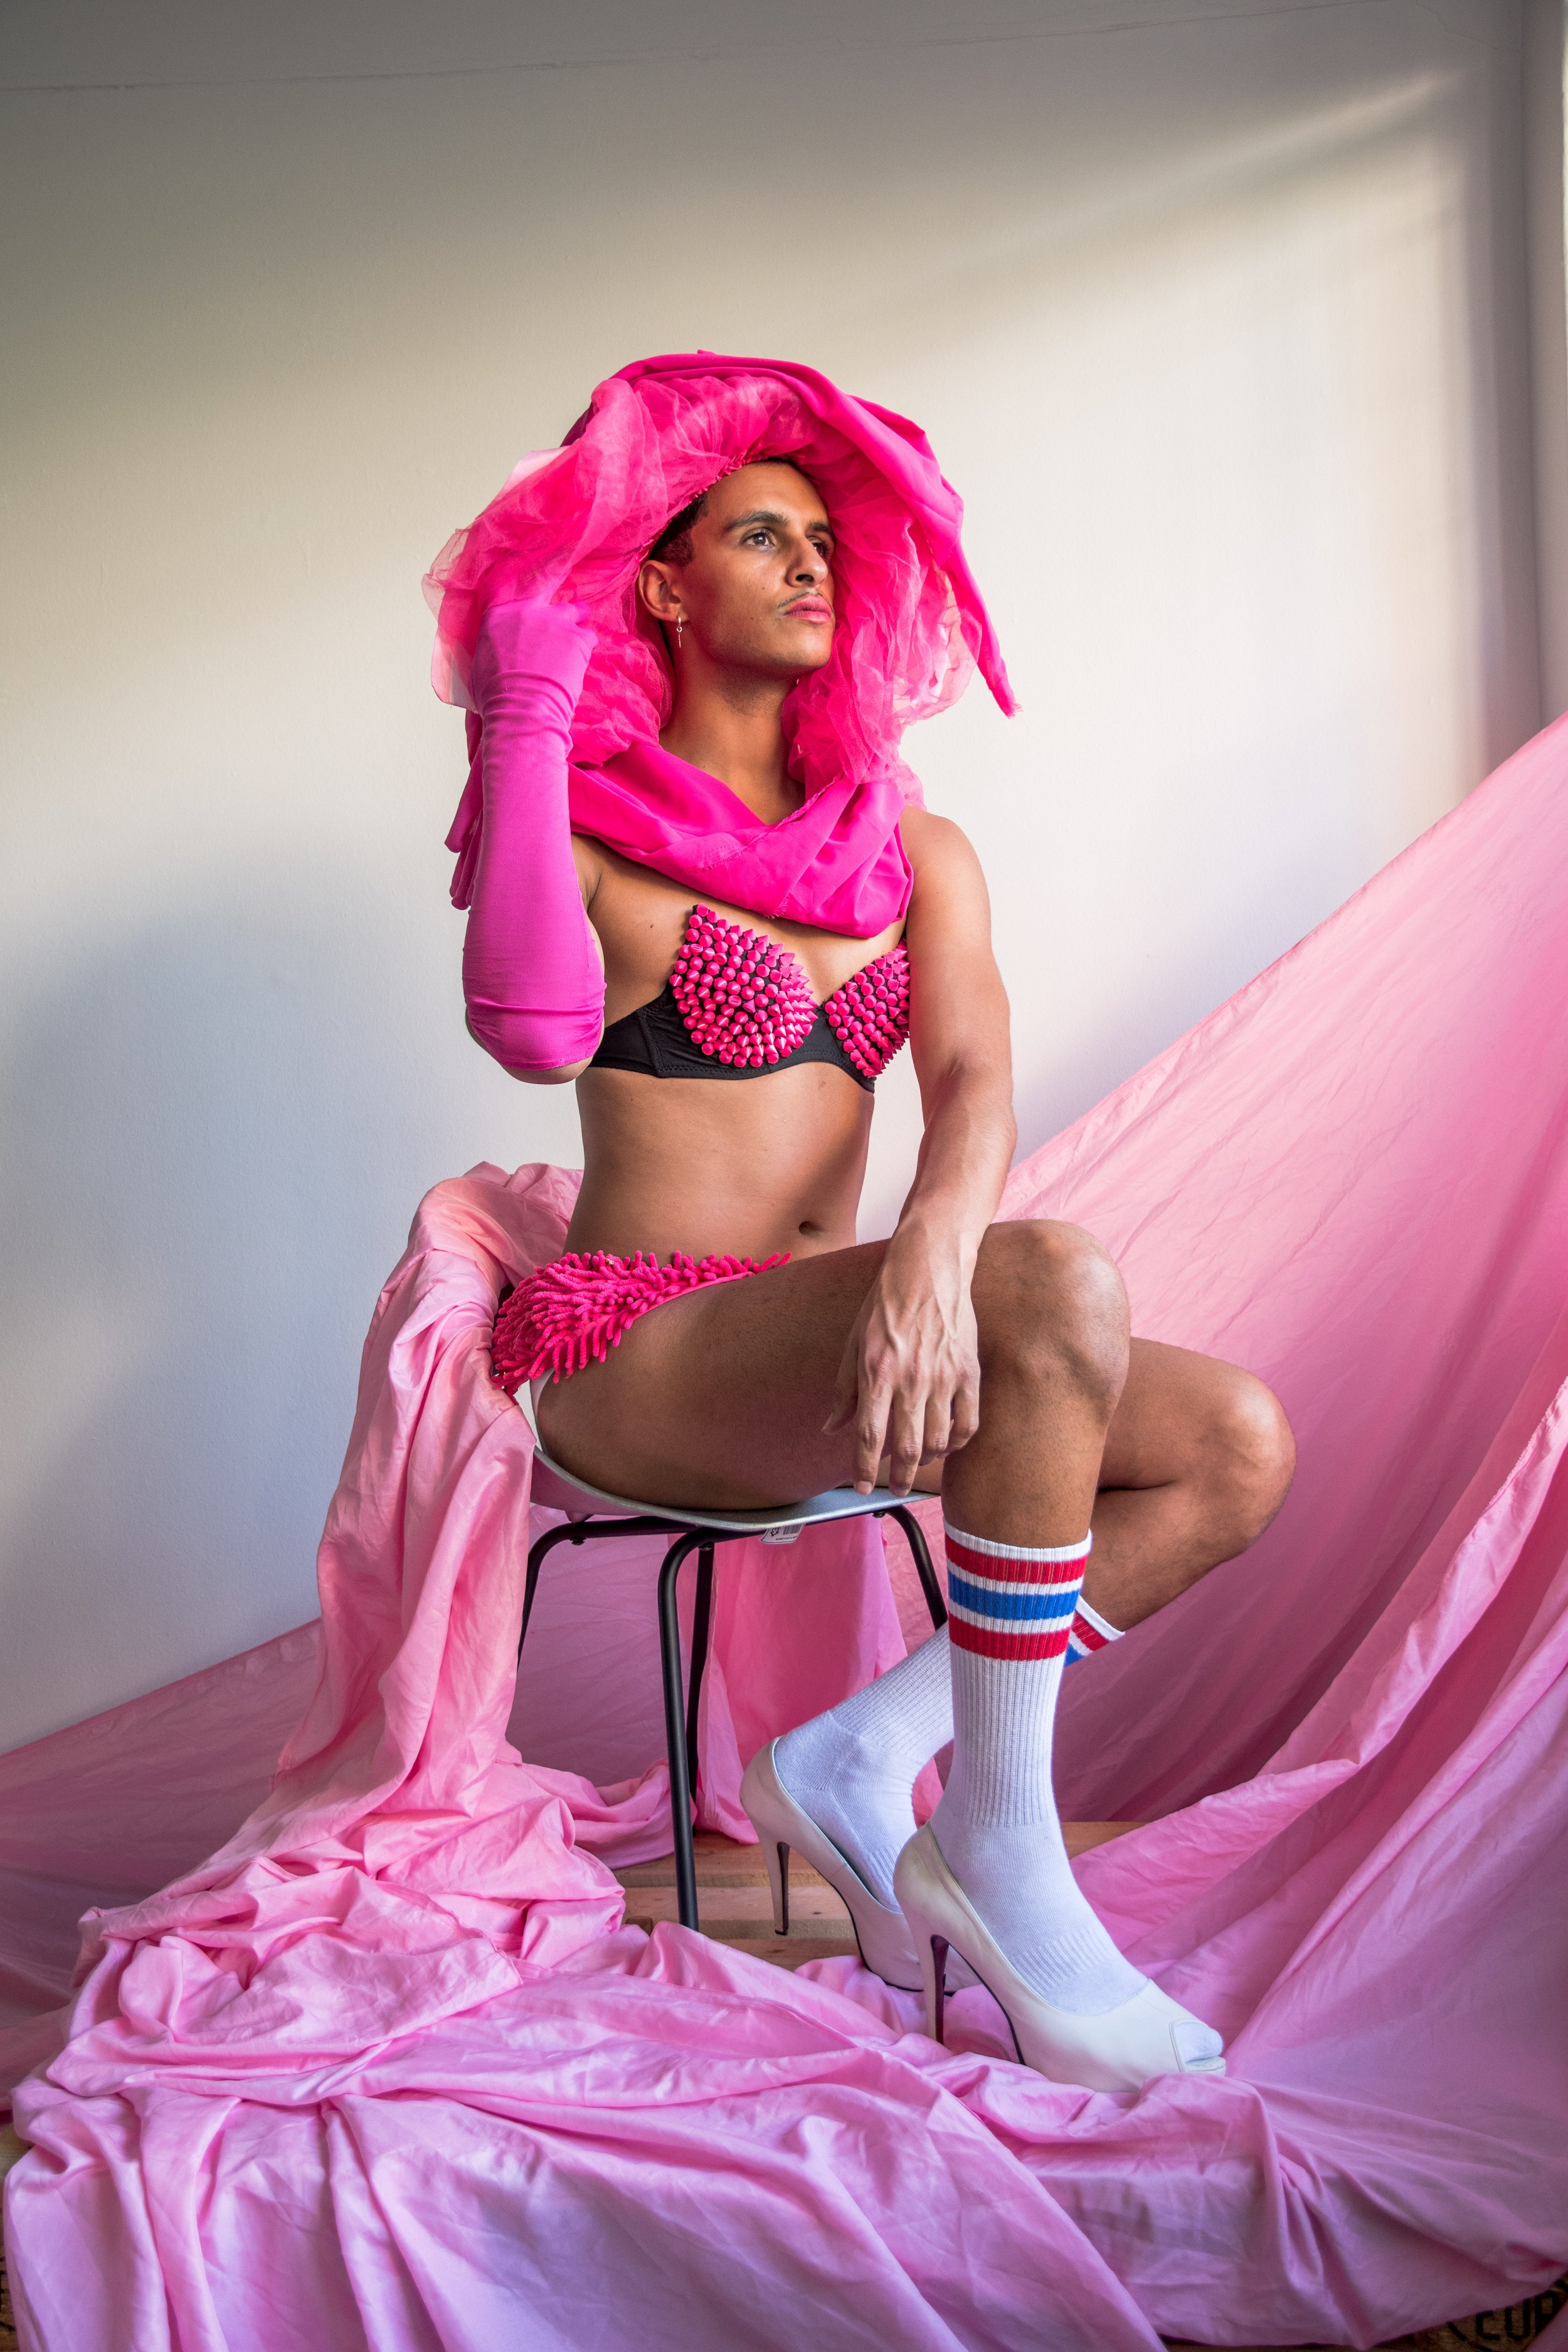  This is an image of Kieron Jina. Kieron is posed sitting on a chair with a white wall behind him that has a pink sheet draped behind them. He is wearing a large matching bright pink hat, one long glove, a black and pink bra, pink underwear, white hi